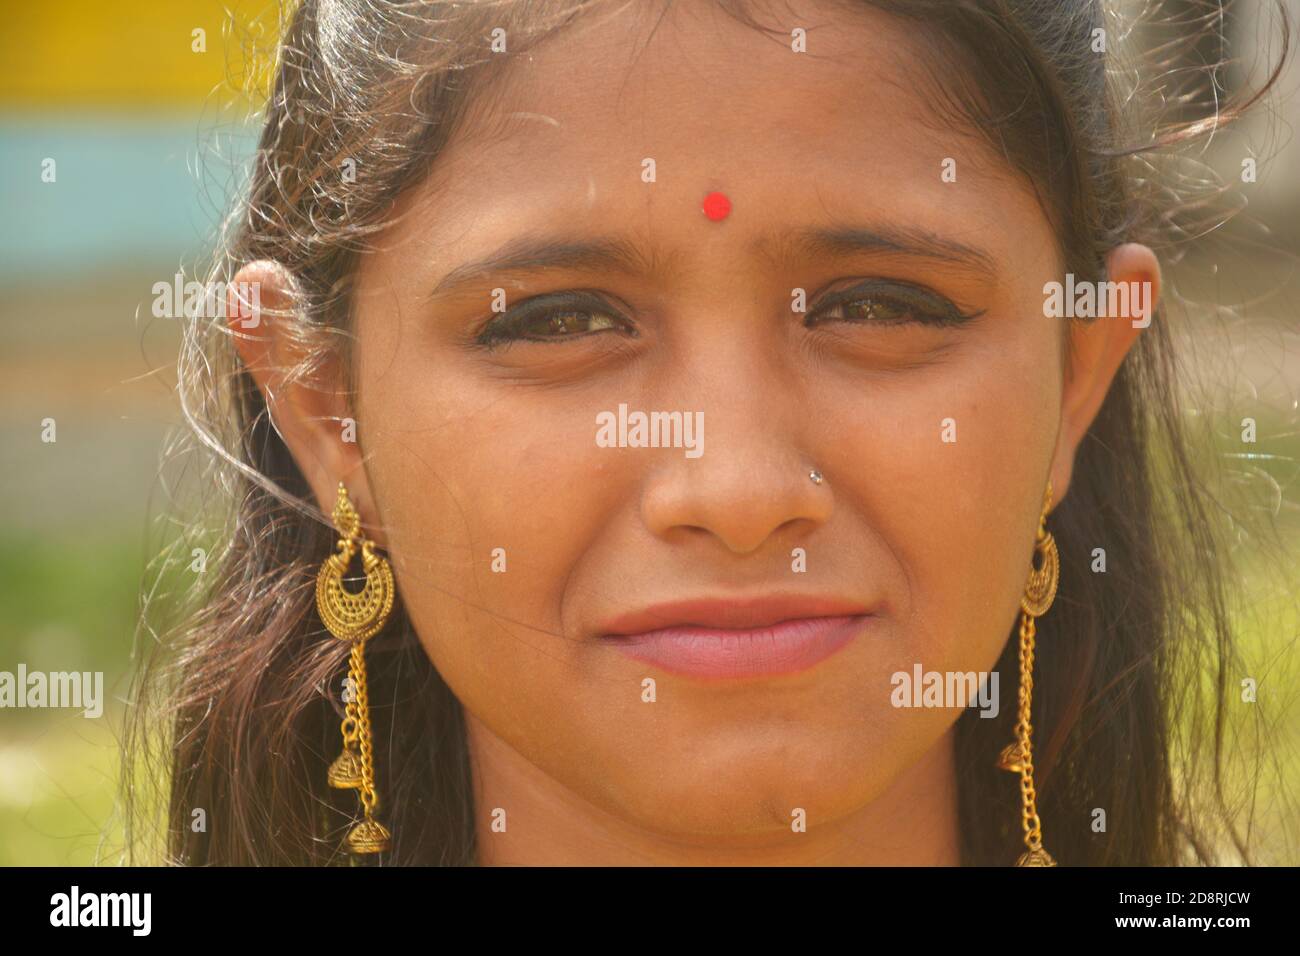 Close up of  Indian Bengali teenage girl wearing traditional Indian saree with golden jewellery erring necklace and bindi on forehead, selective focus Stock Photo